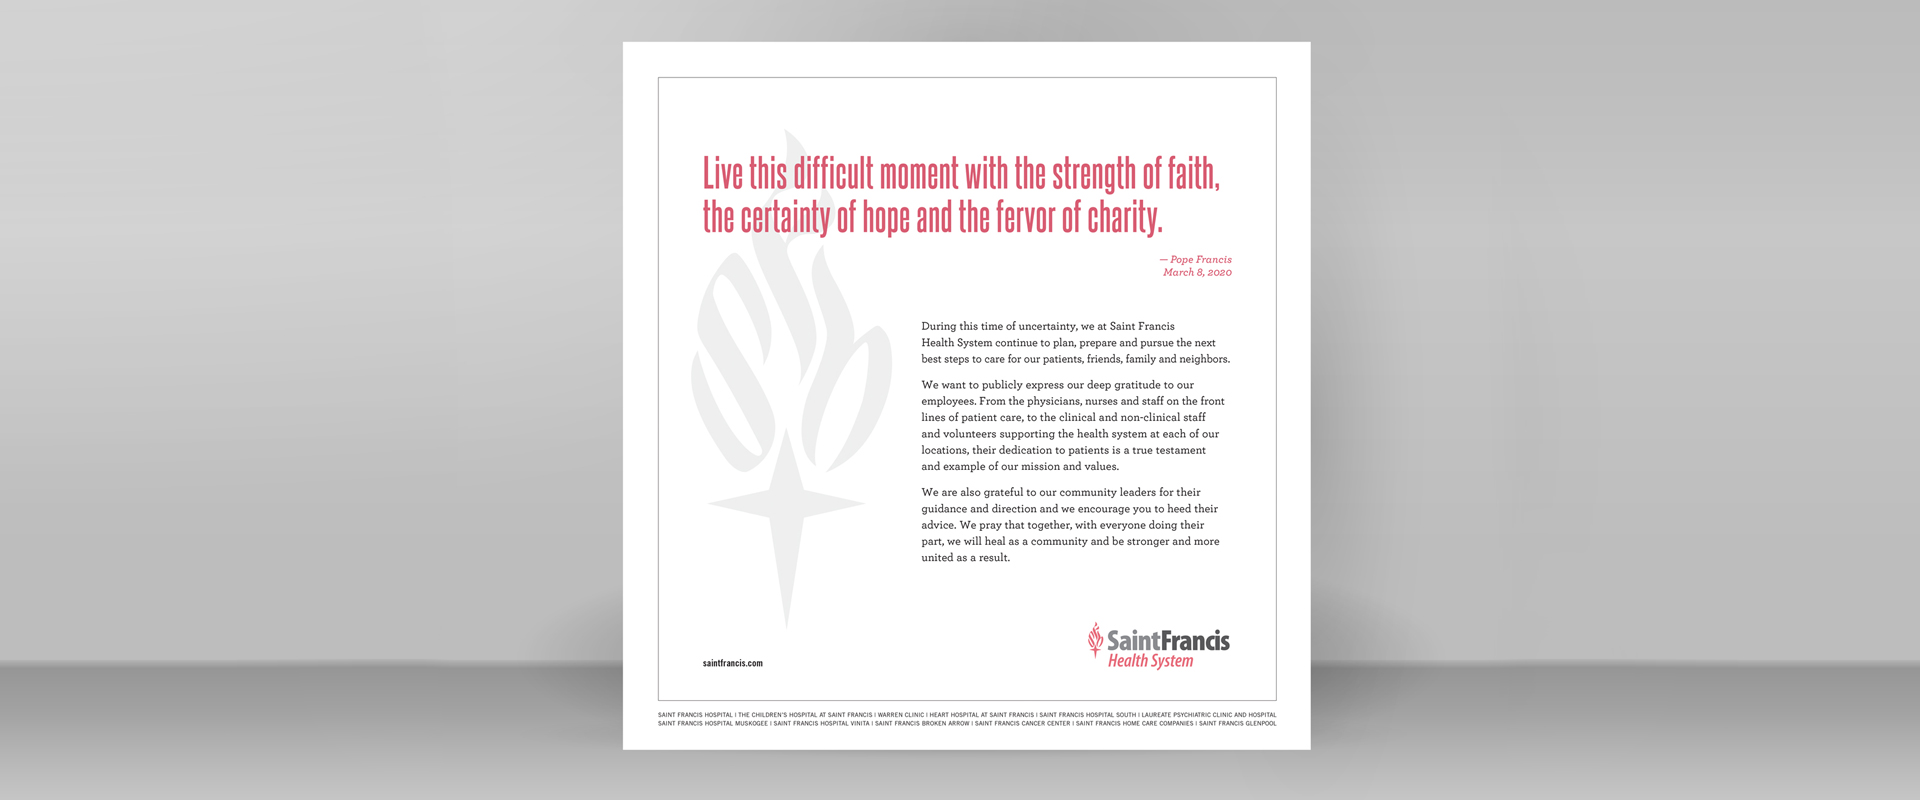 Branded messaging for Saint Francis Health System designed by AcrobatAnt.